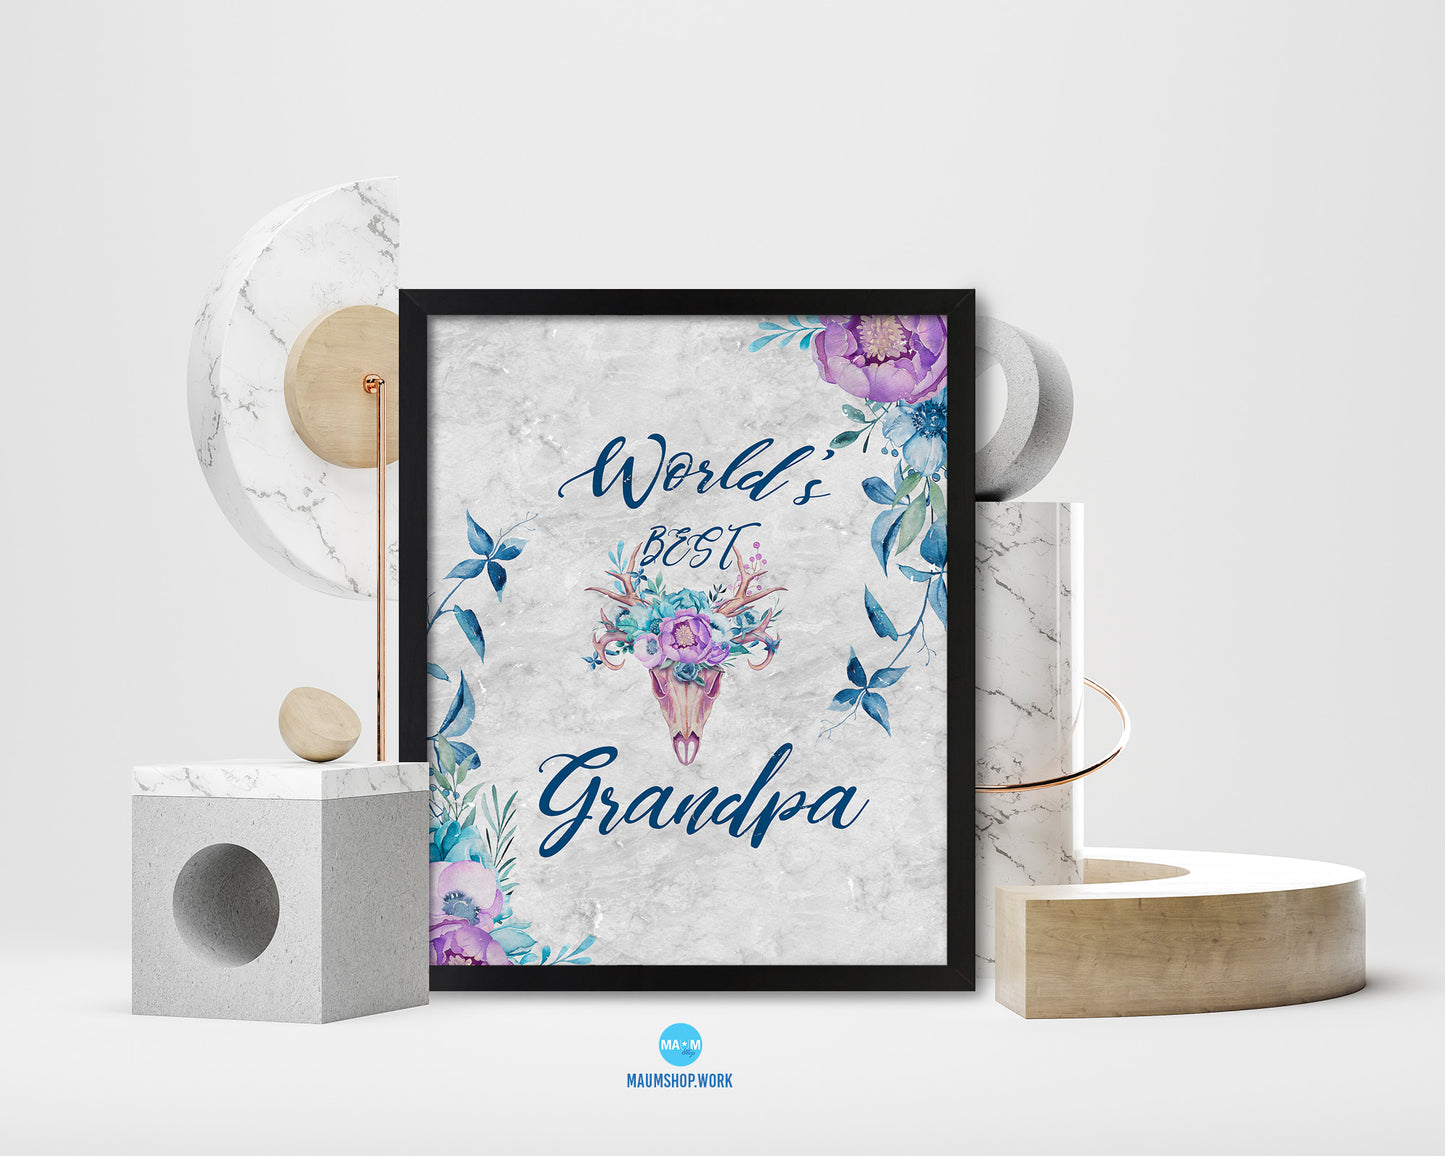 World's best grandpa Quote Framed Print Wall Art Decor Gifts